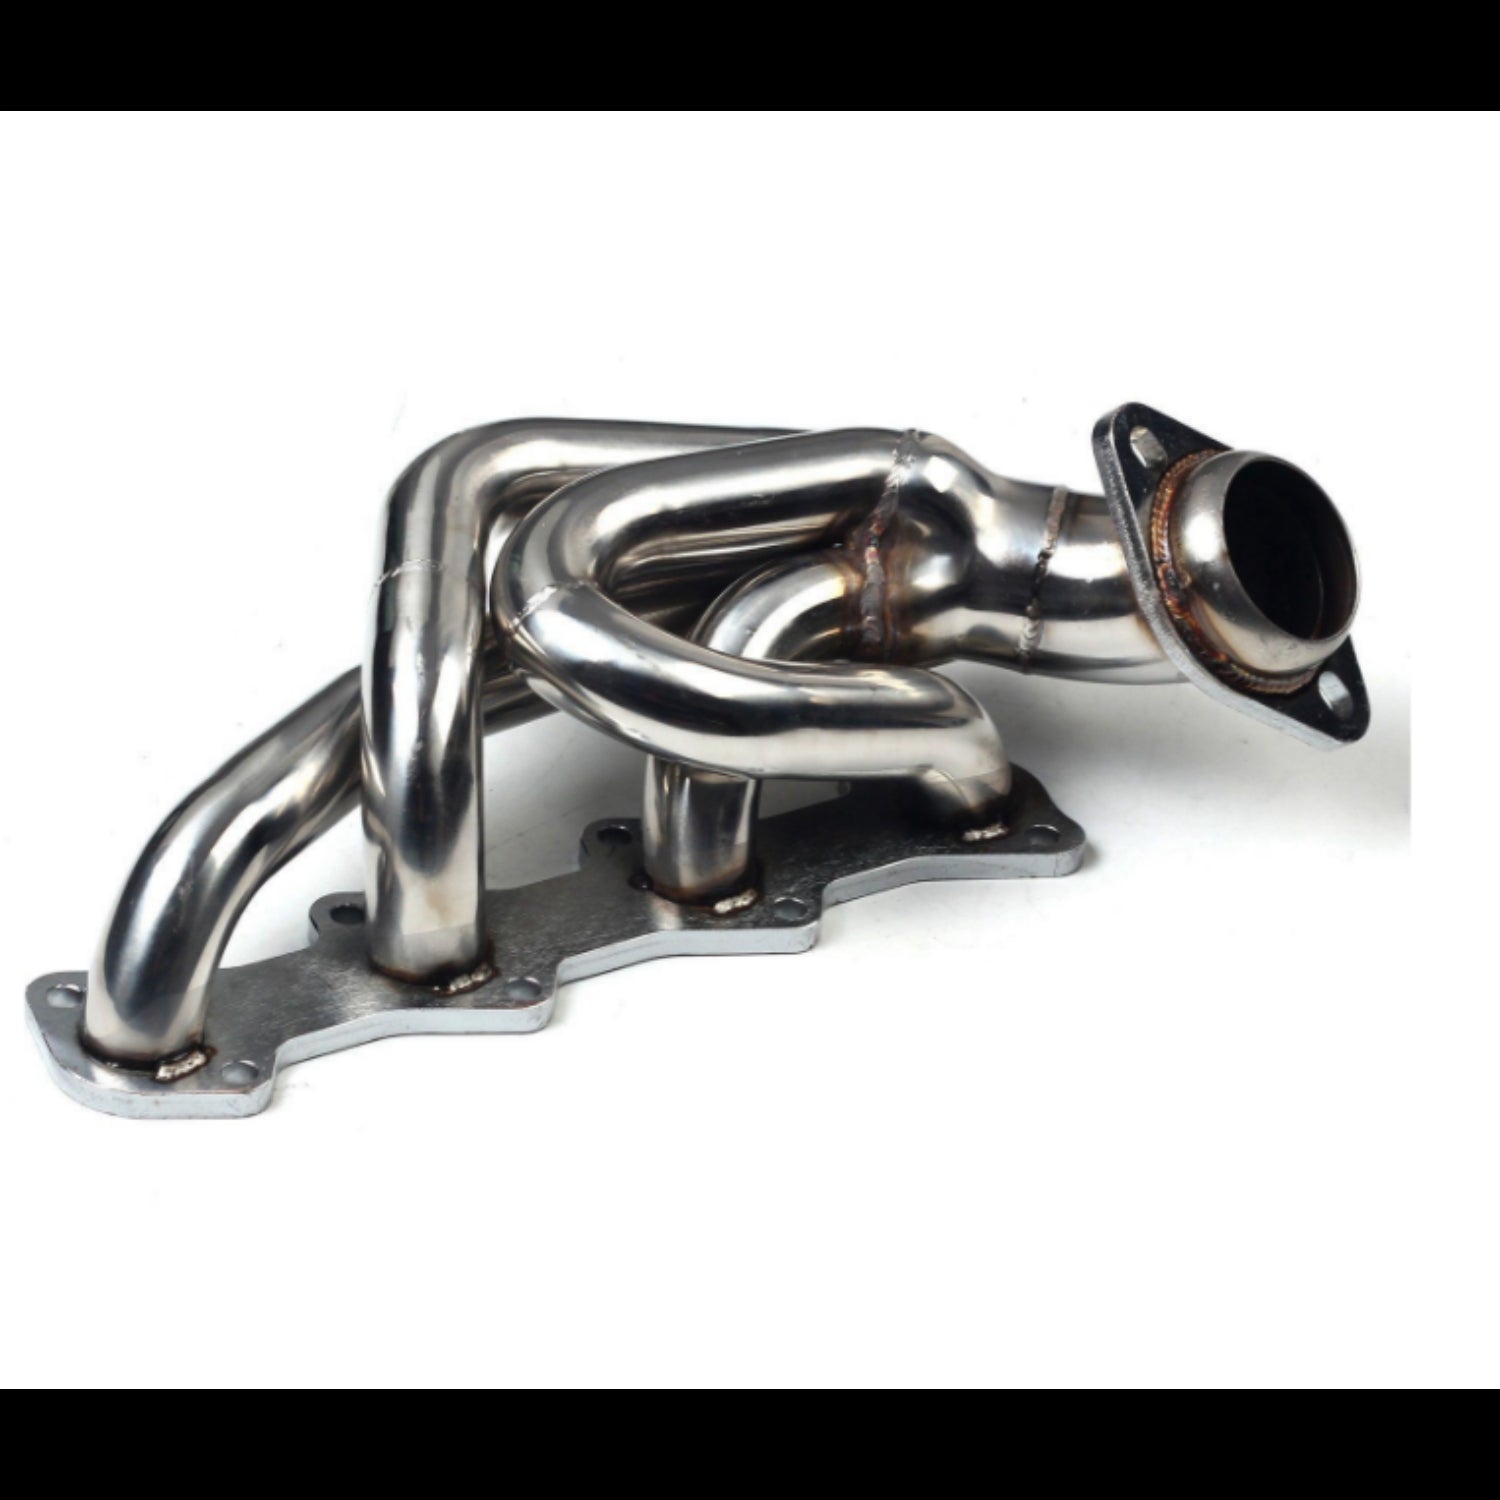 Exhaust Manifold Header for Ford F150 F250 Expedition V8 5.4 1997-2003